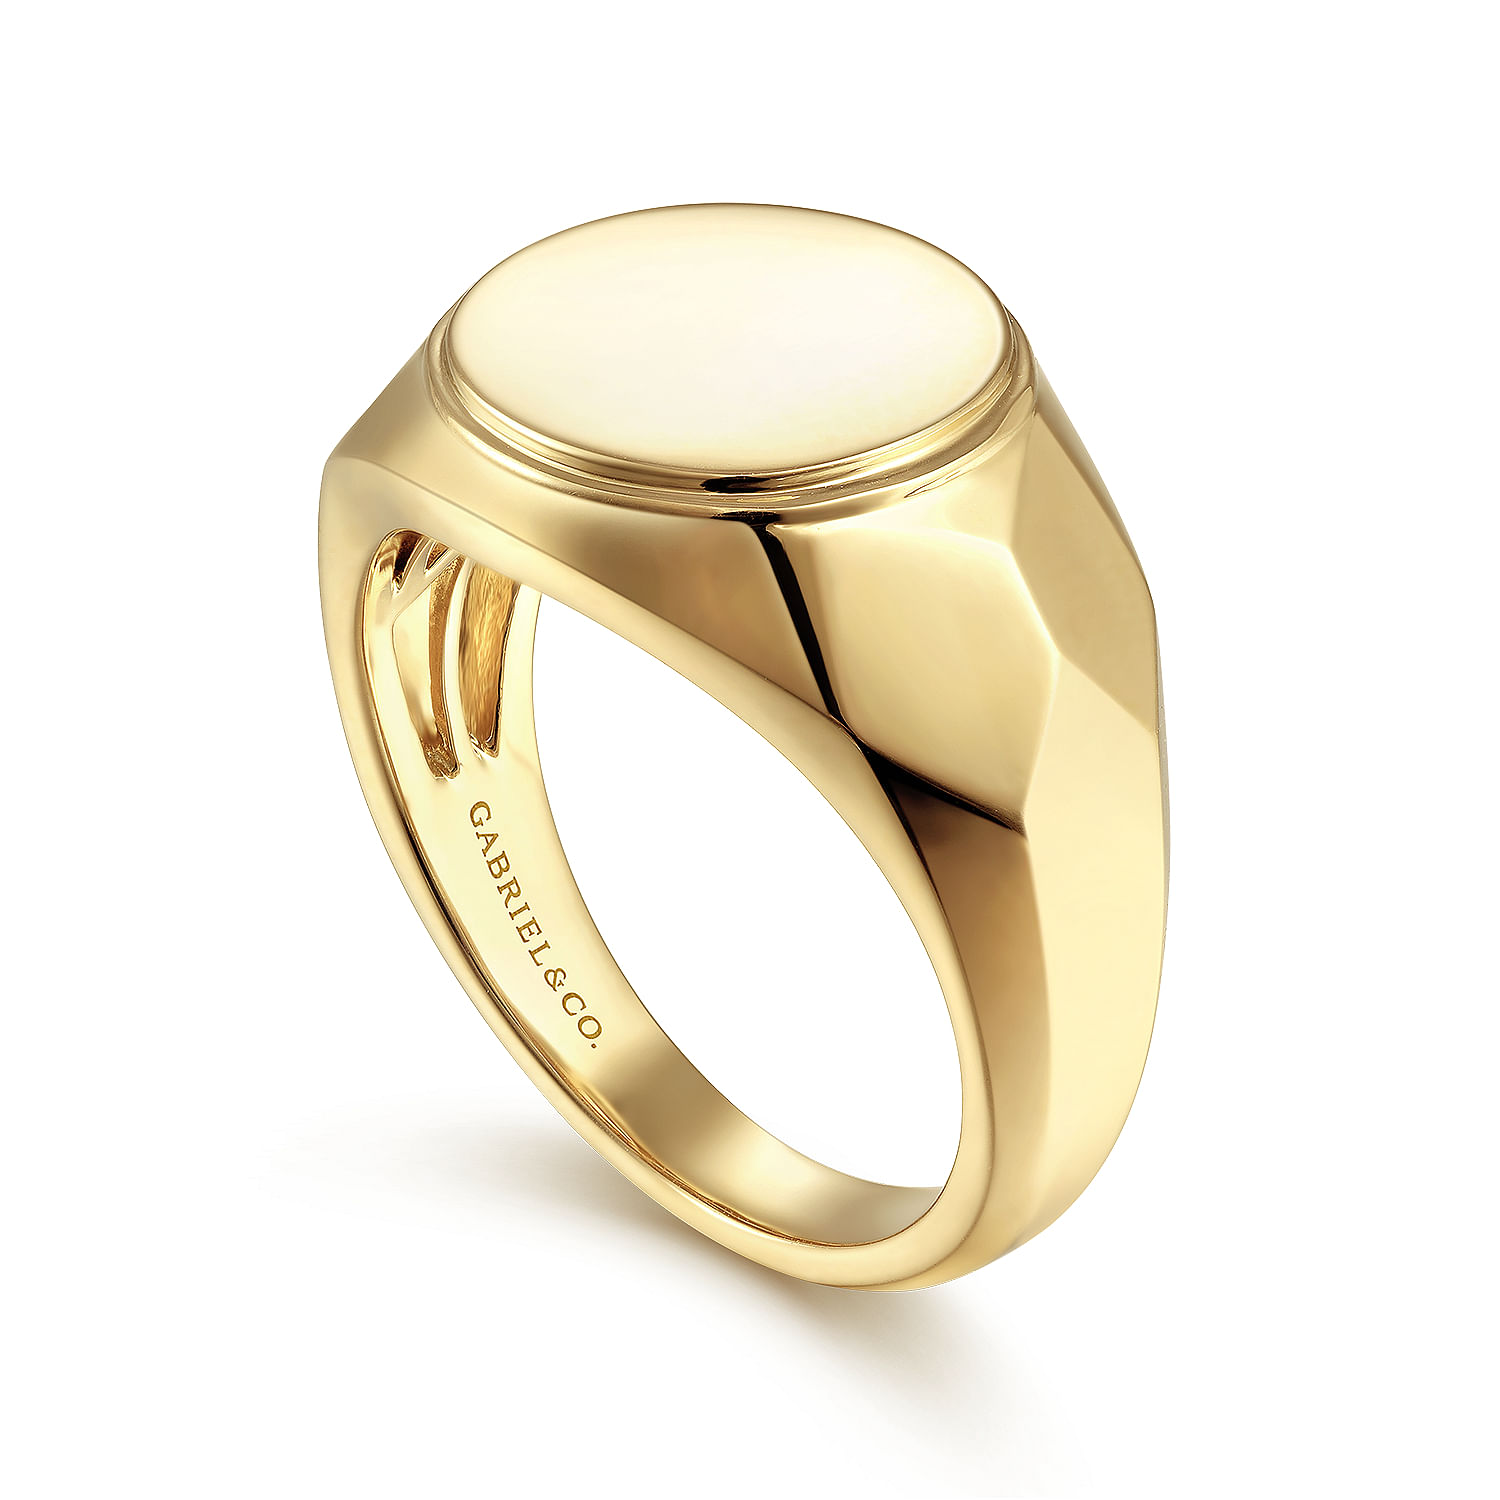 Wide 14K Yellow Gold Round Signet Ring in High Polished Finish